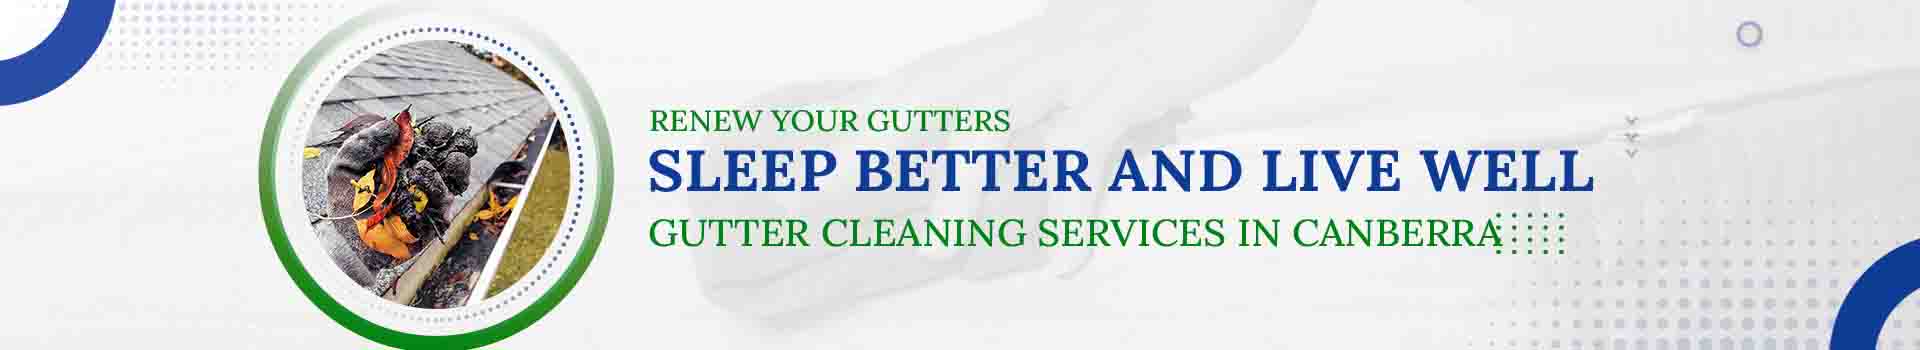 banner for gutter cleaning service canberra